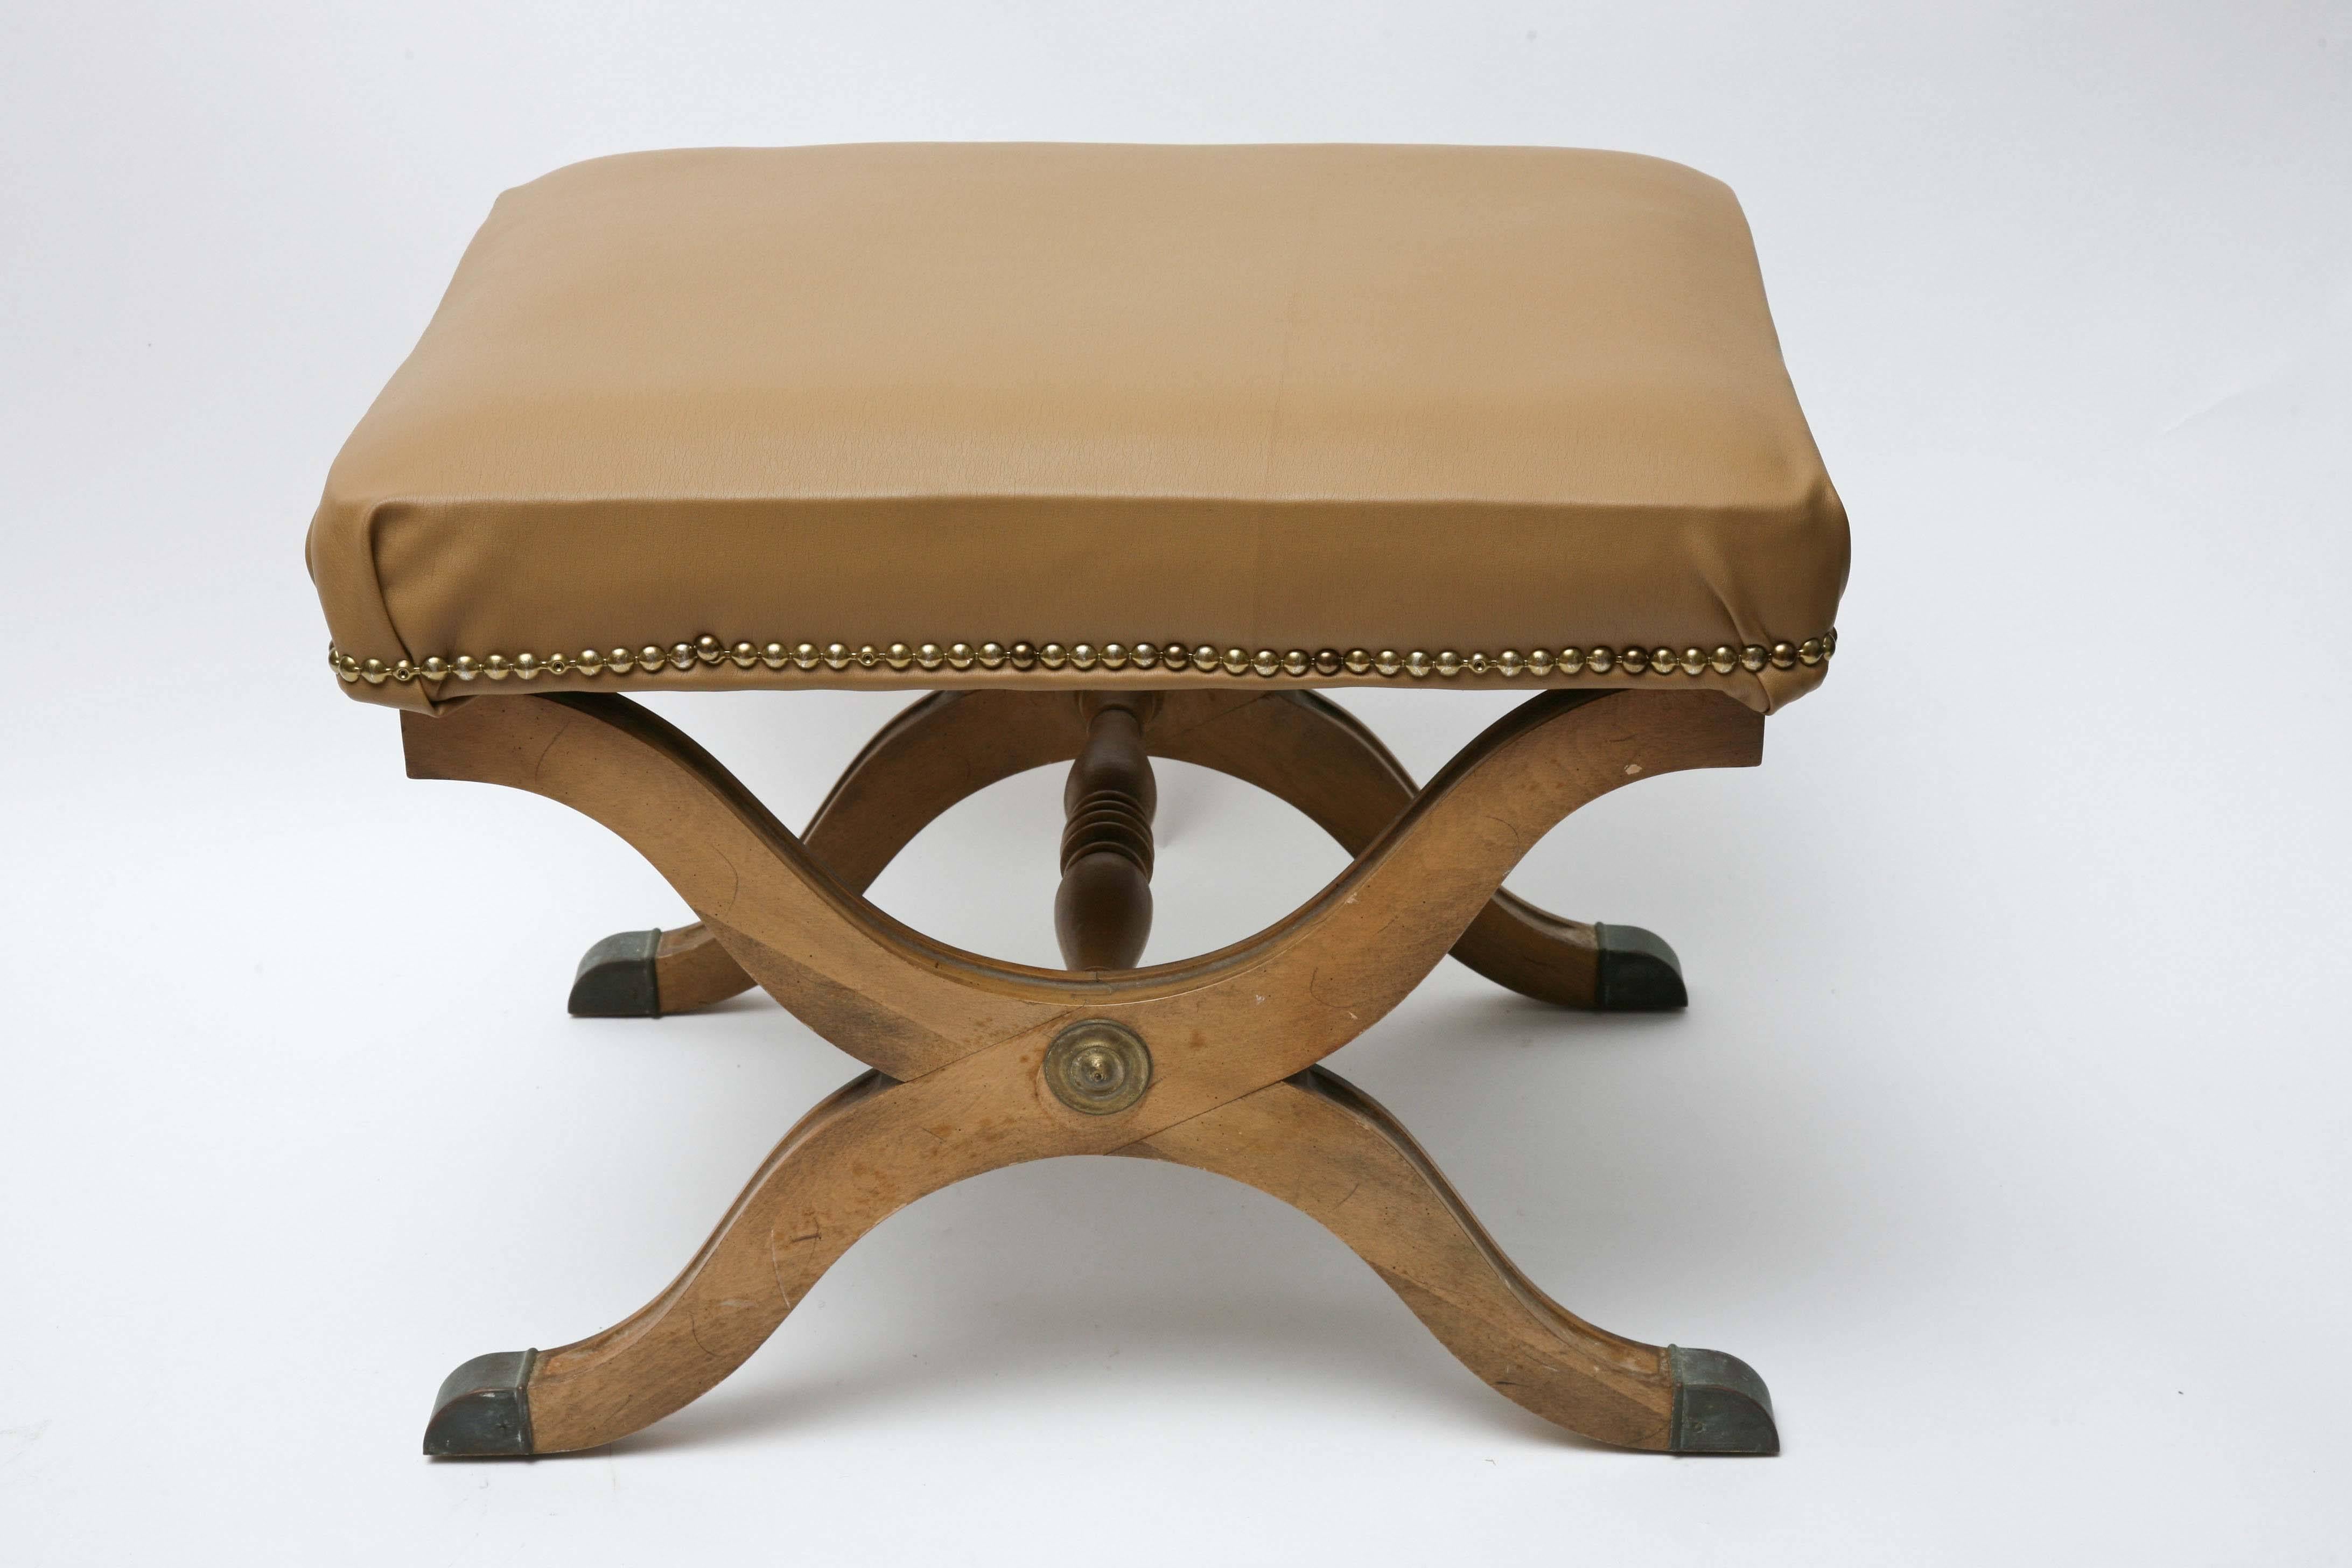 Pair of foot stools by Dorothy Draper for Henredon. They have been recovered at some point.